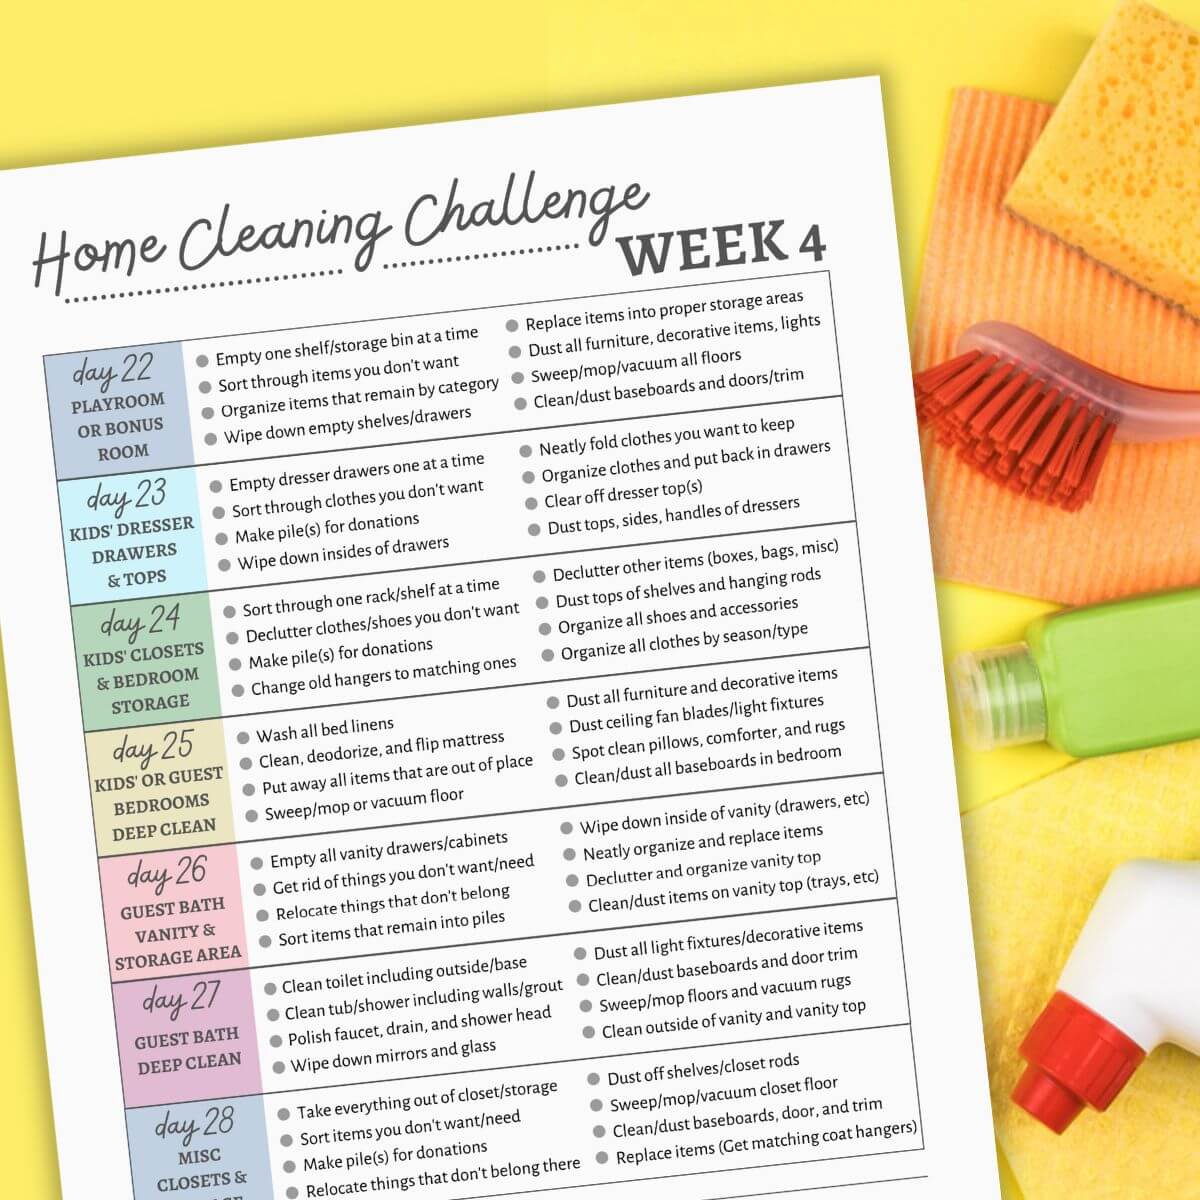 https://thesavvysparrow.com/wp-content/uploads/2022/11/home-cleaning-organizing-challenge.jpg